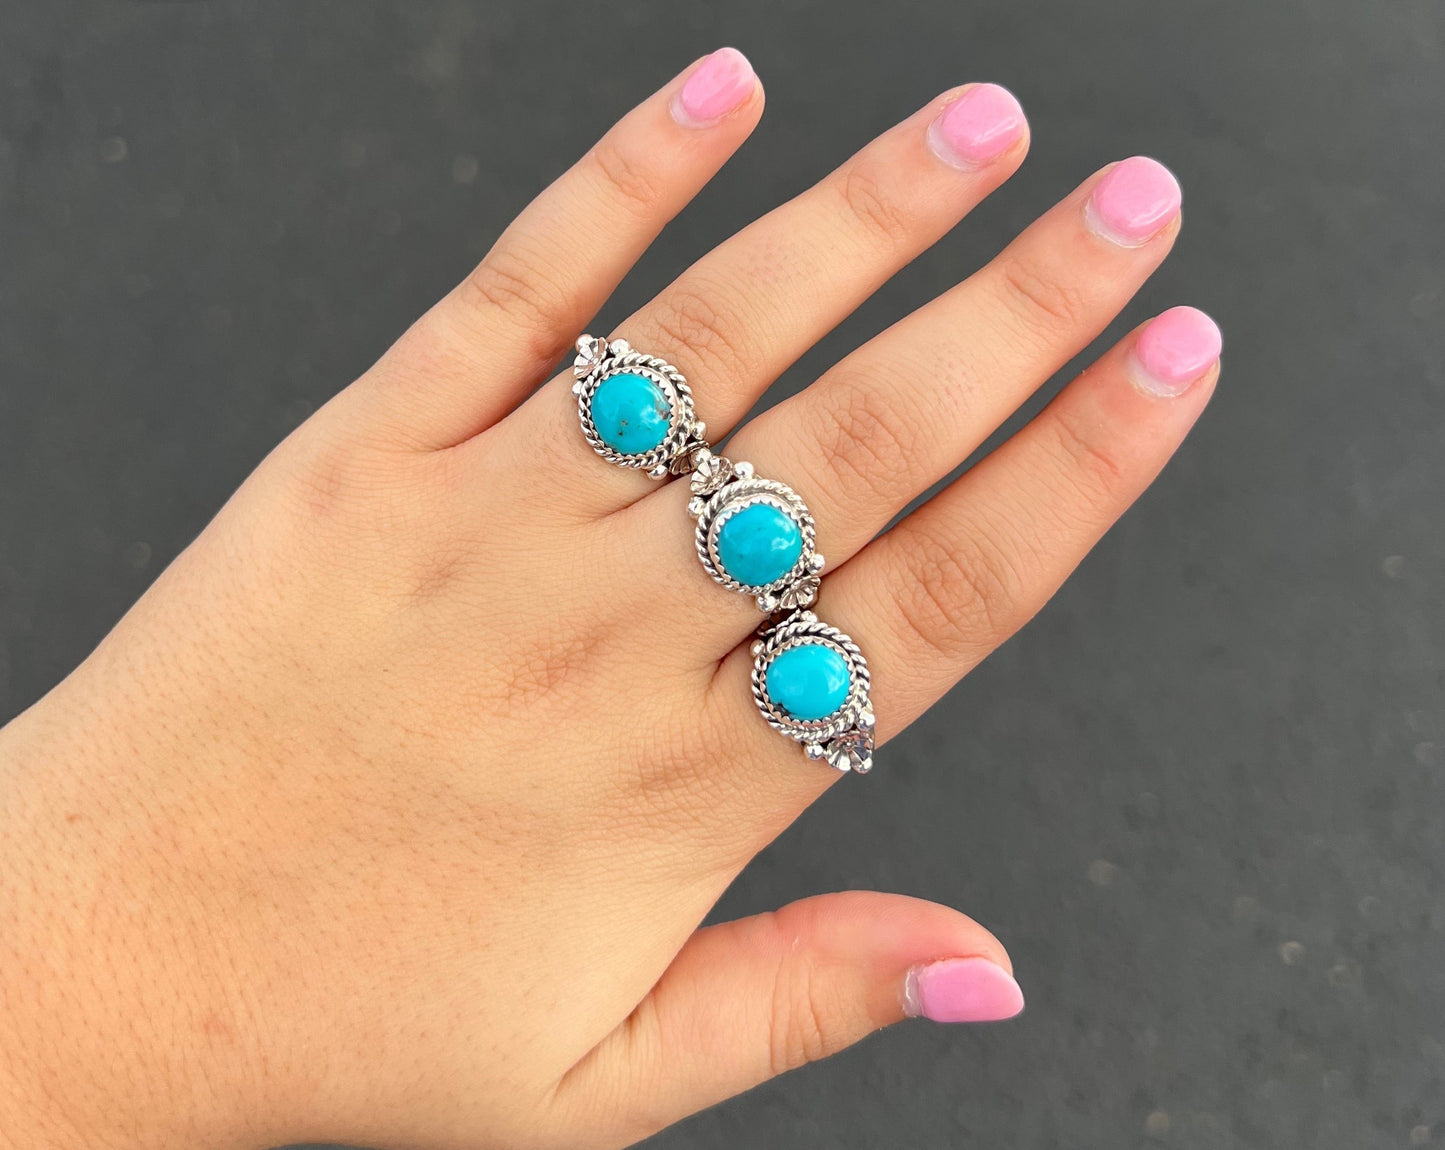 Turquoise and Sterling Silver Flower Ring